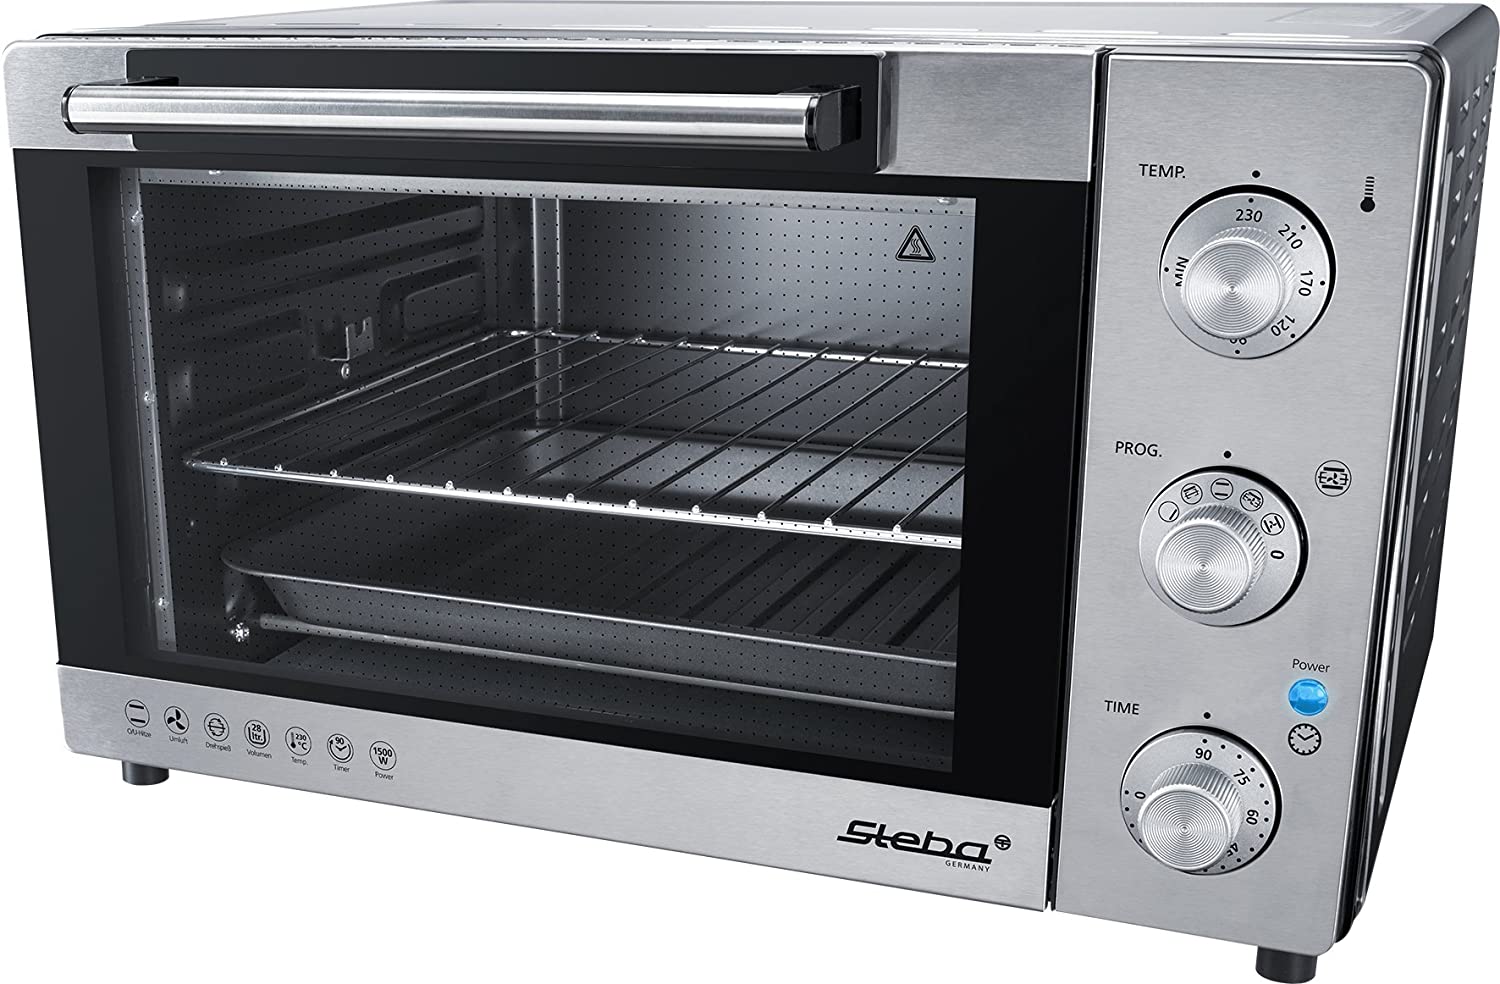 Steba KB 28 Grill and Bake Oven, 1500 W, Stainless Steel